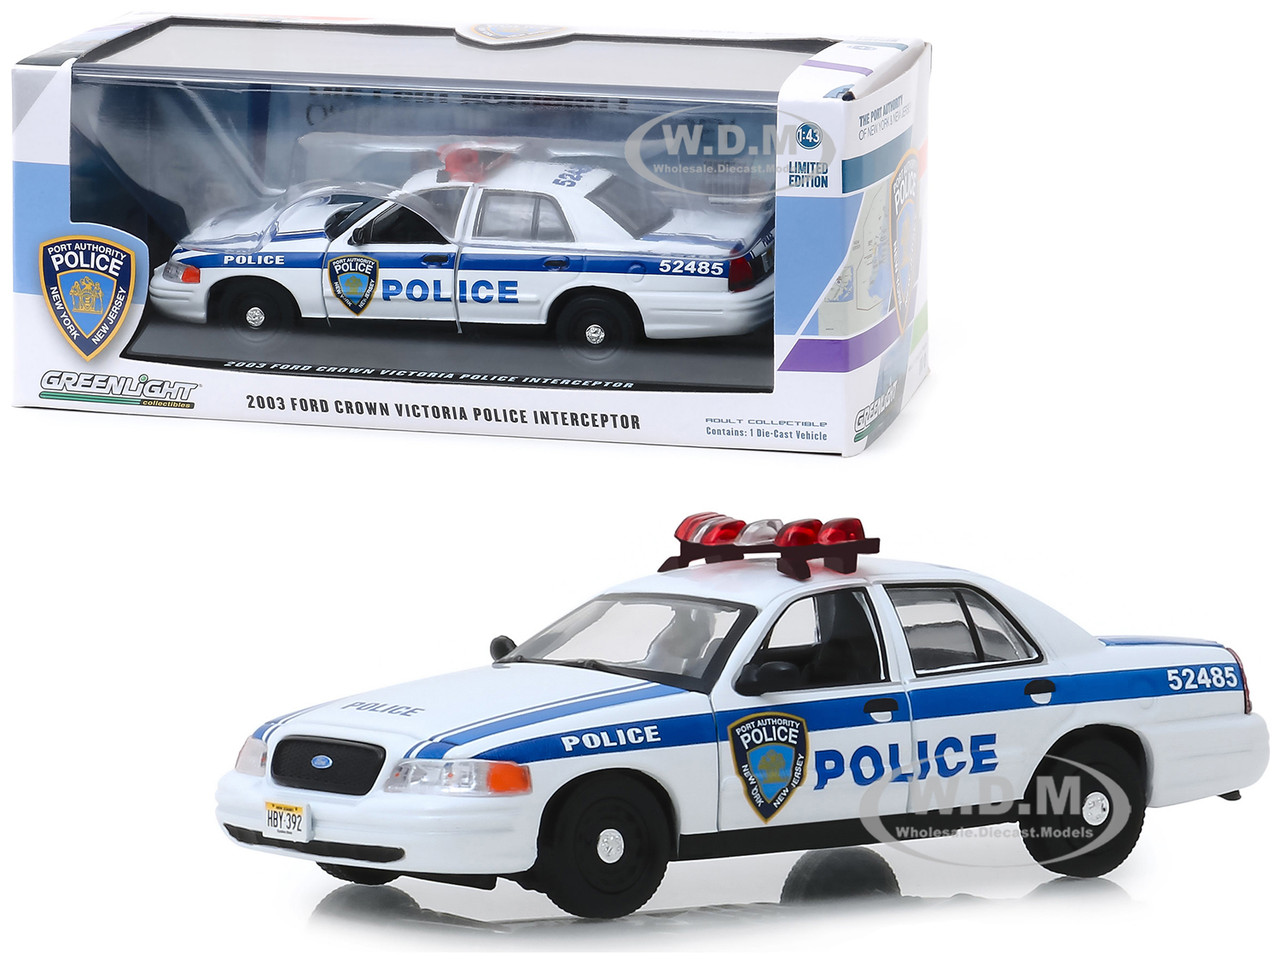 86520 Greenlight 1//43 MacGyver TV SHOW 2003 Ford Crown Victoria Police Car